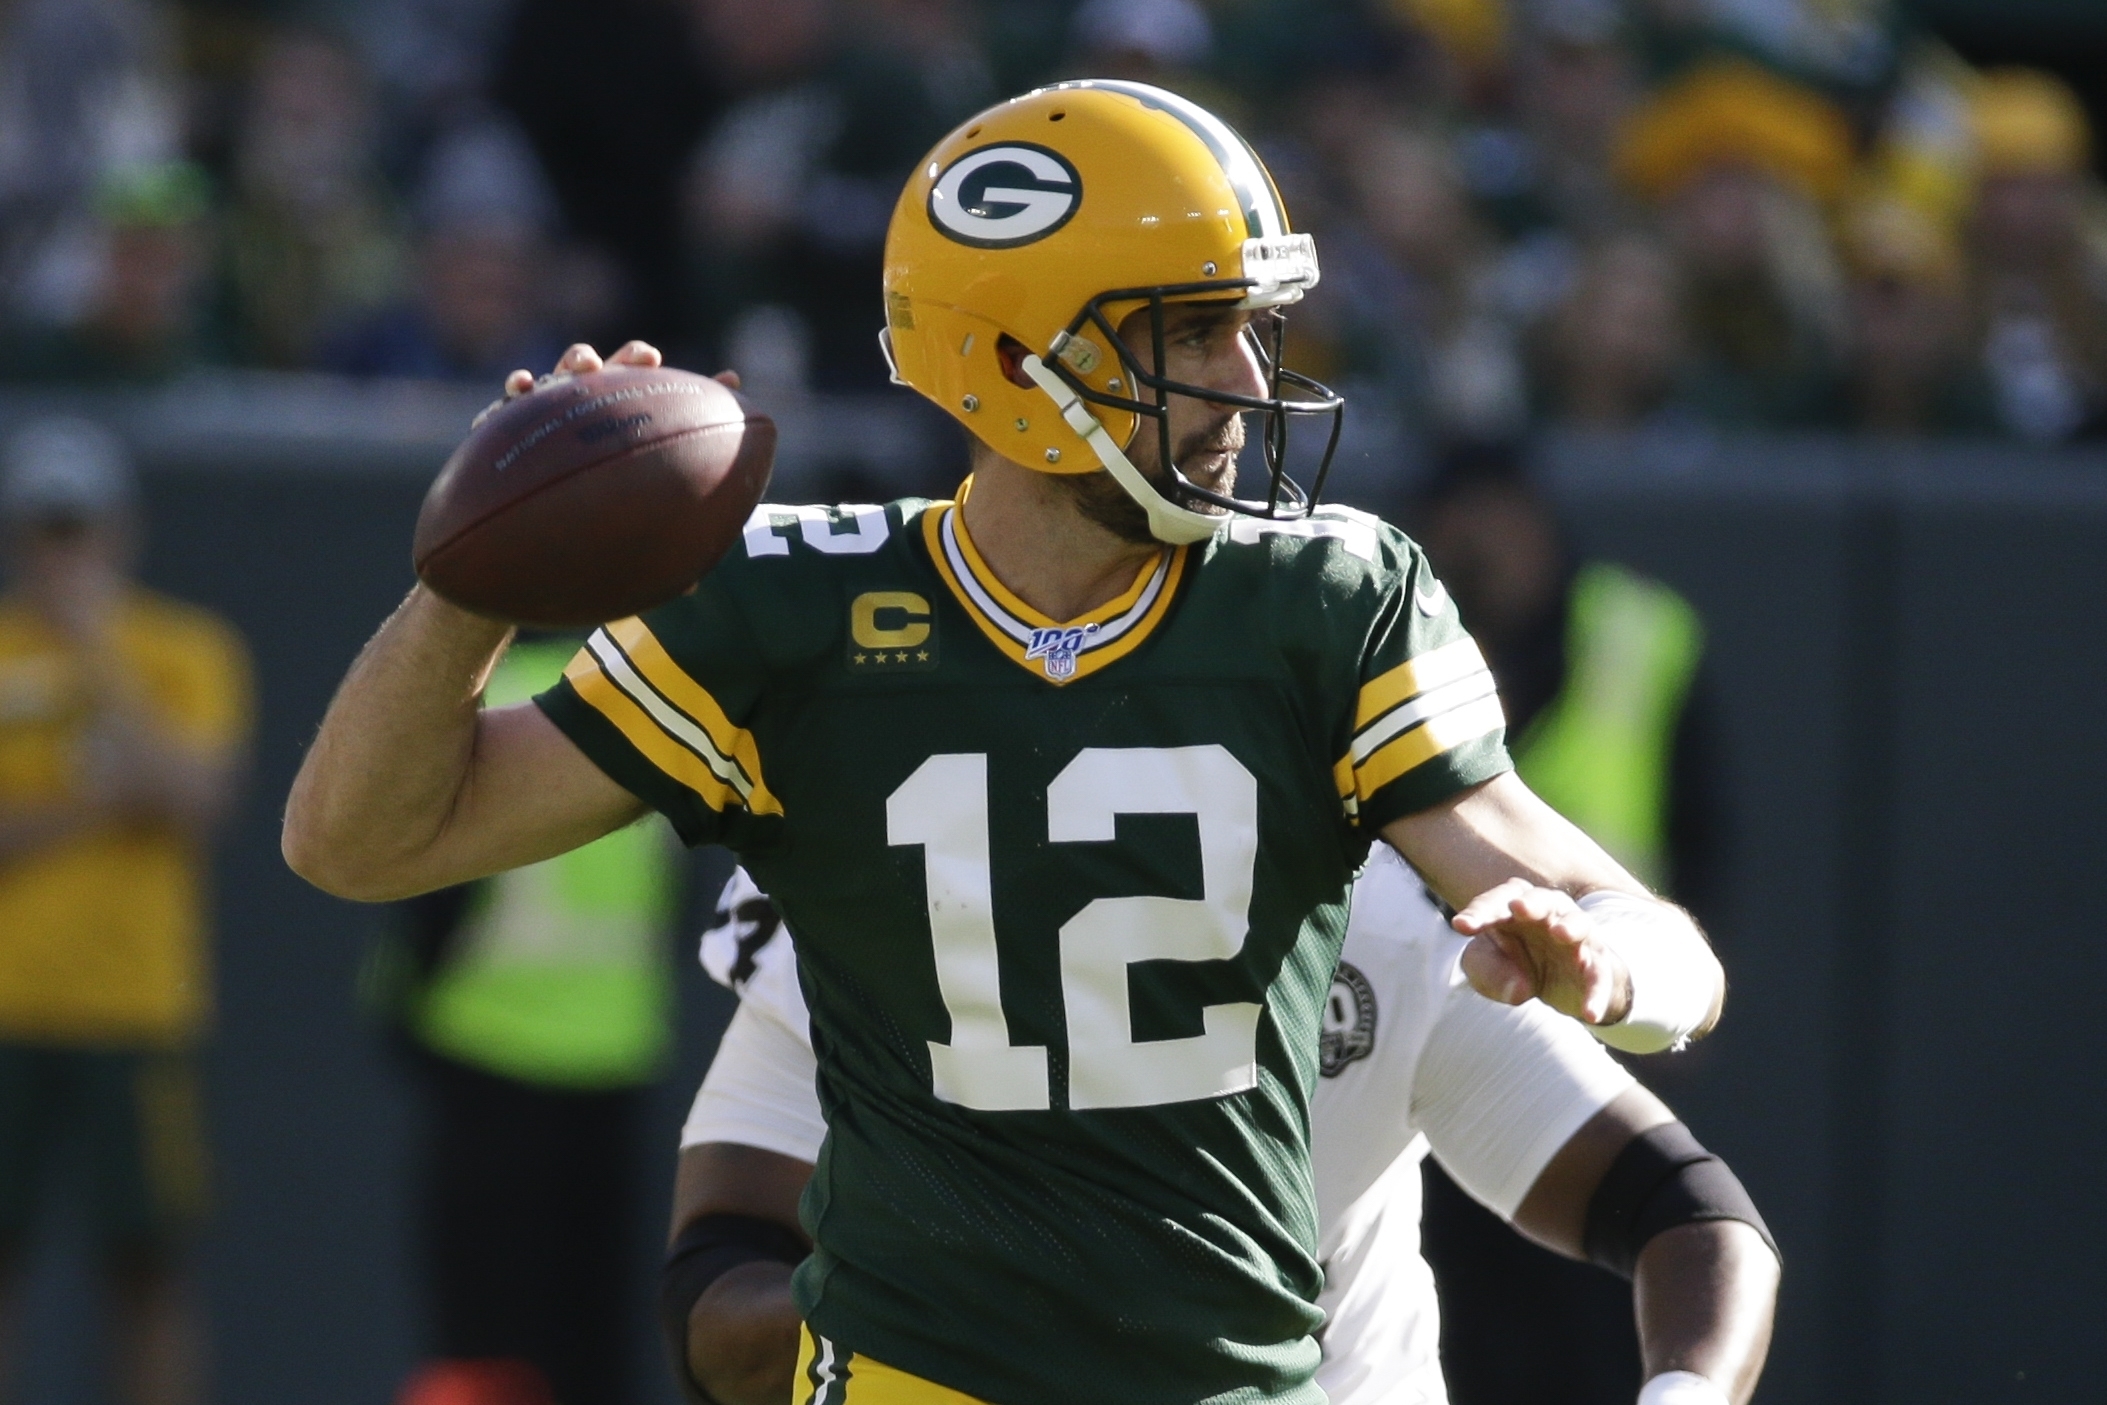 Rodgers has 5 TD passes, 1 rushing score as Packers roll